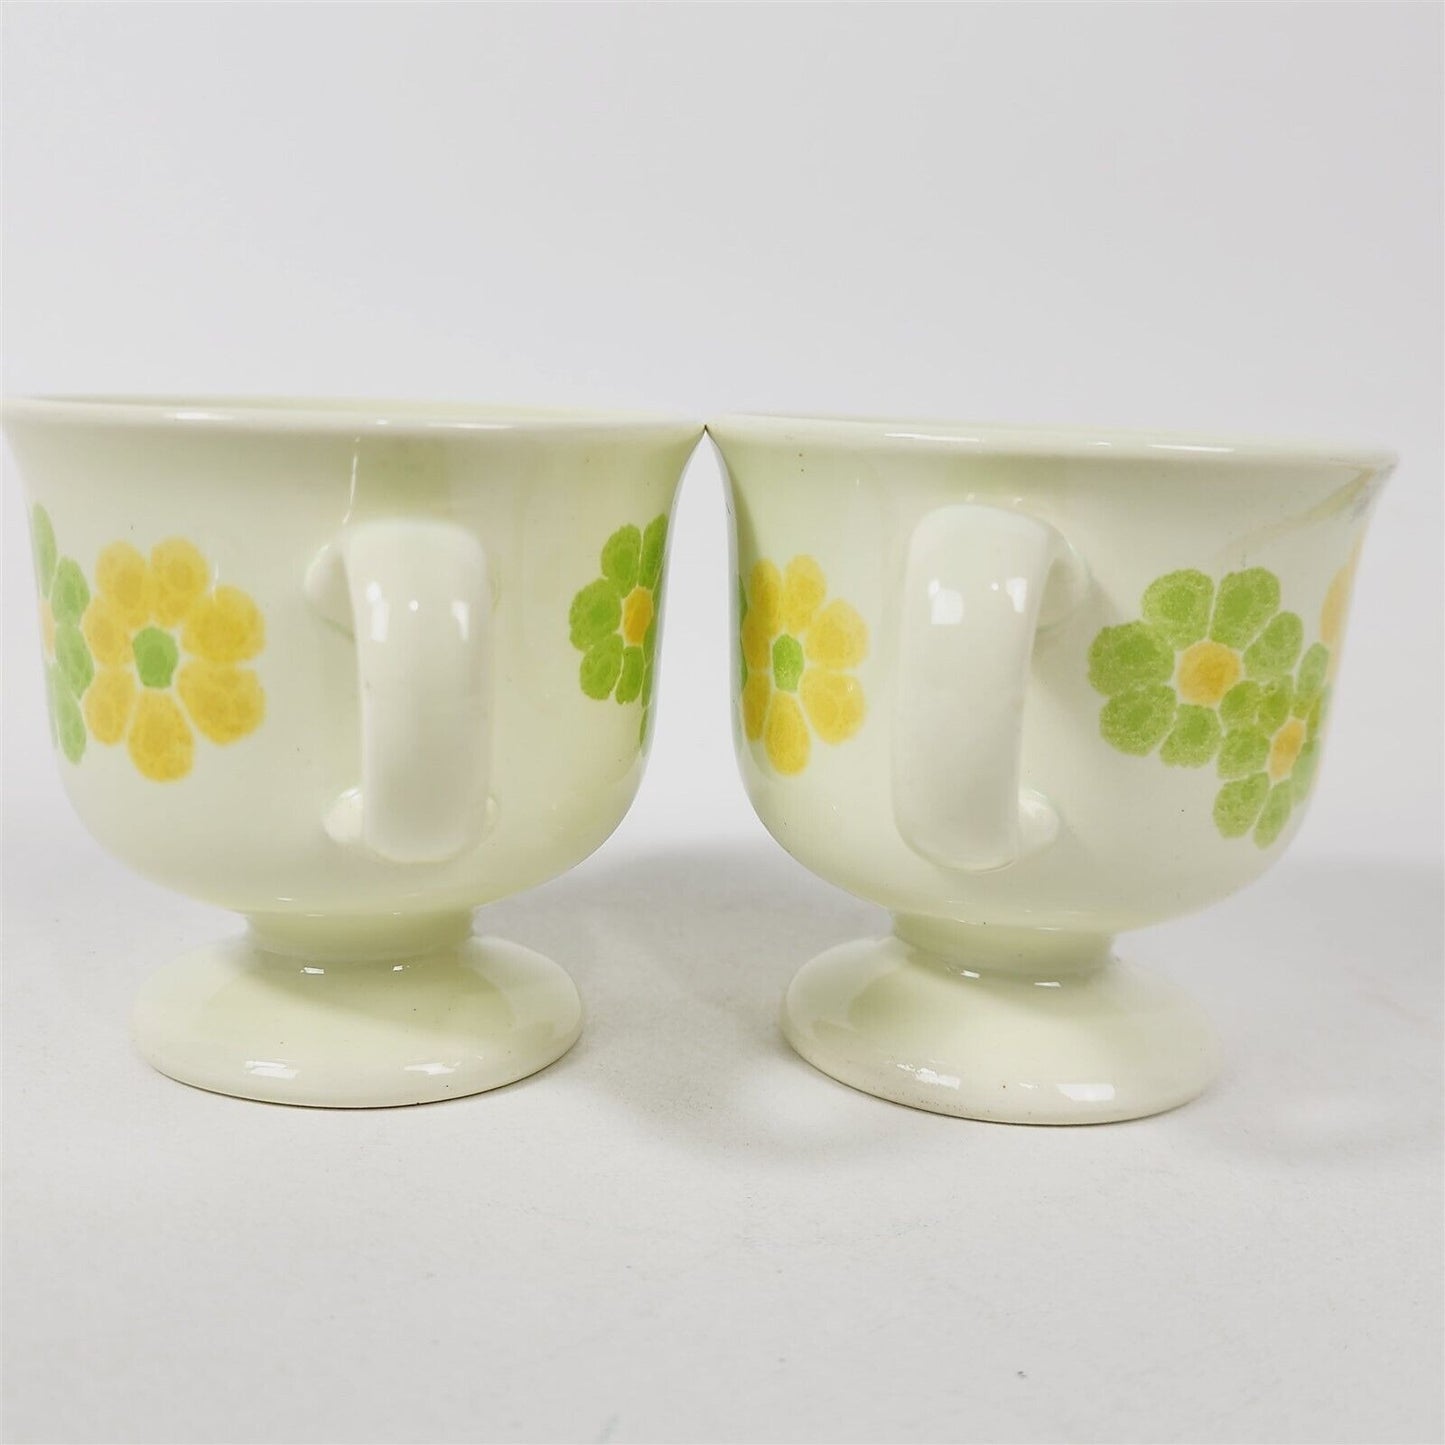 Vtg Franciscan Earthenware Picnic Green Yellow Floral Footed Coffee Mugs Saucer